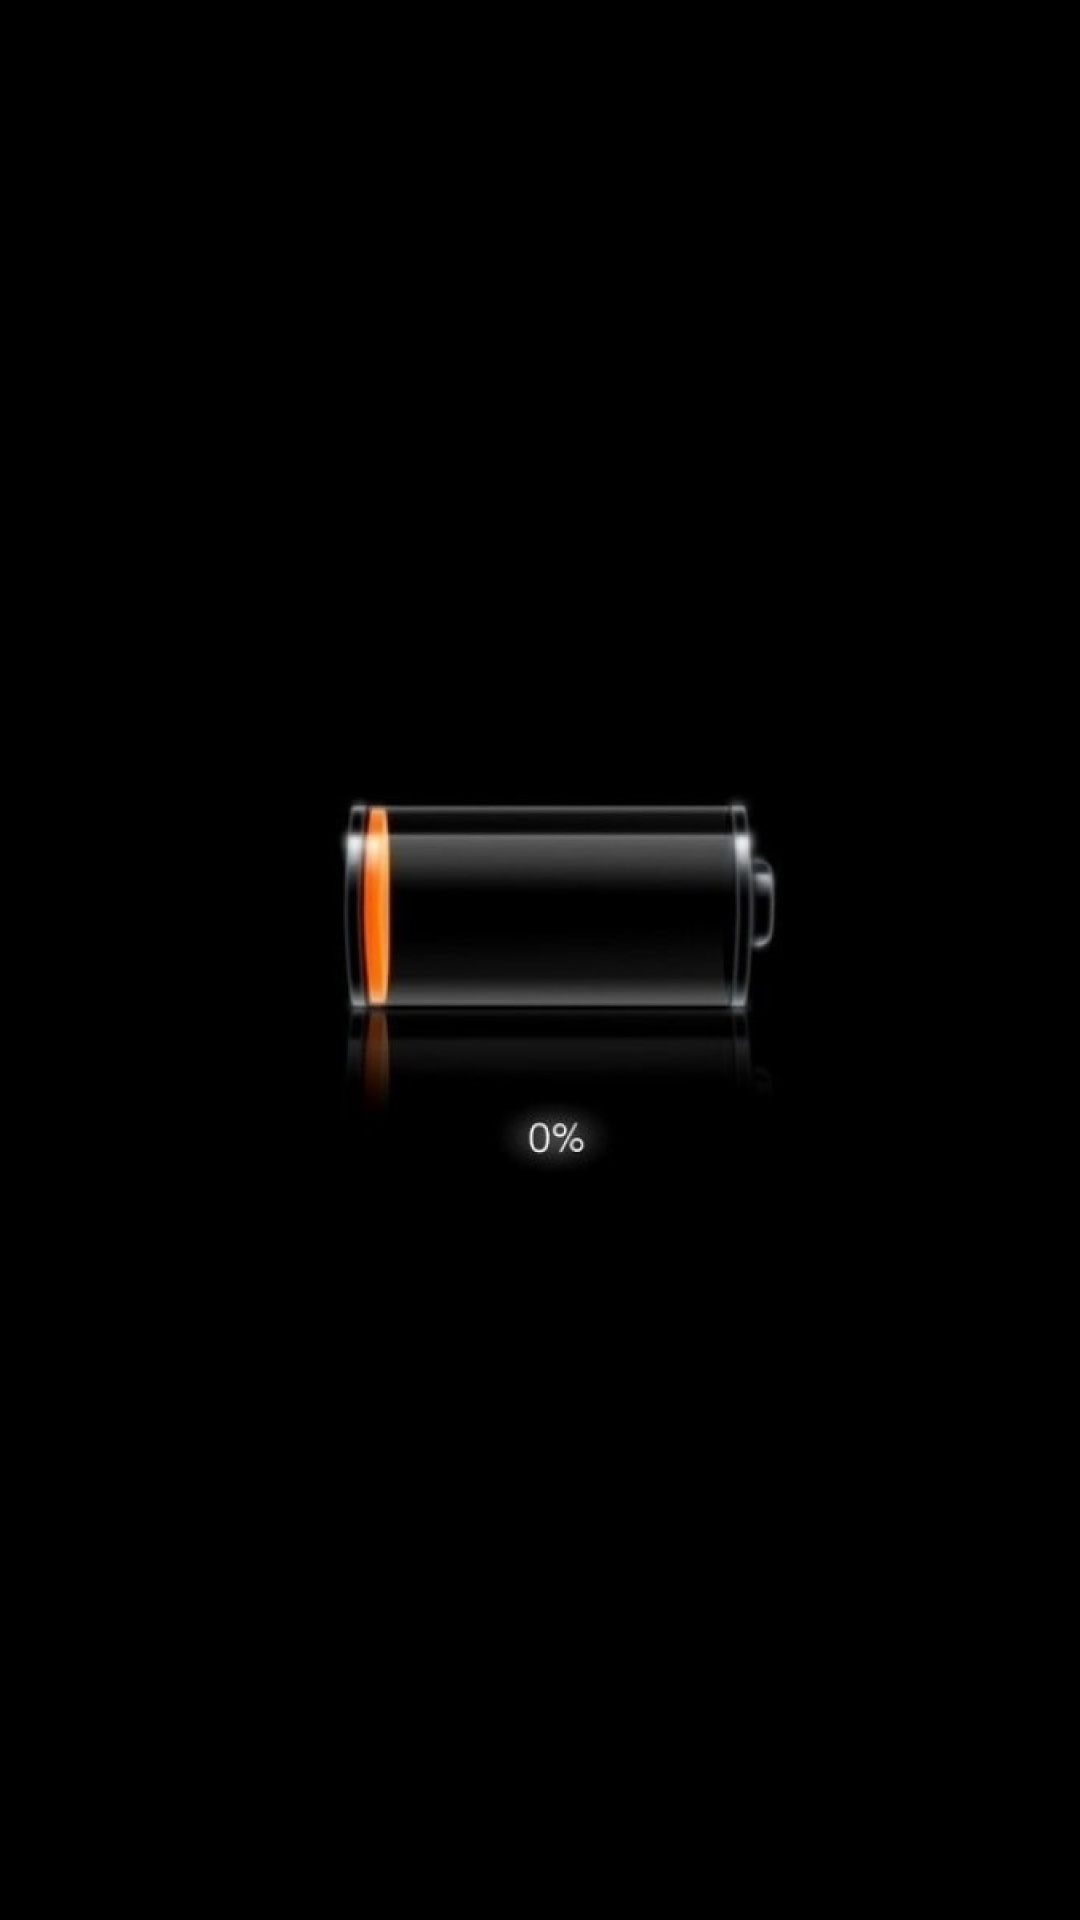 Das Battery Charge Wallpaper 1080x1920